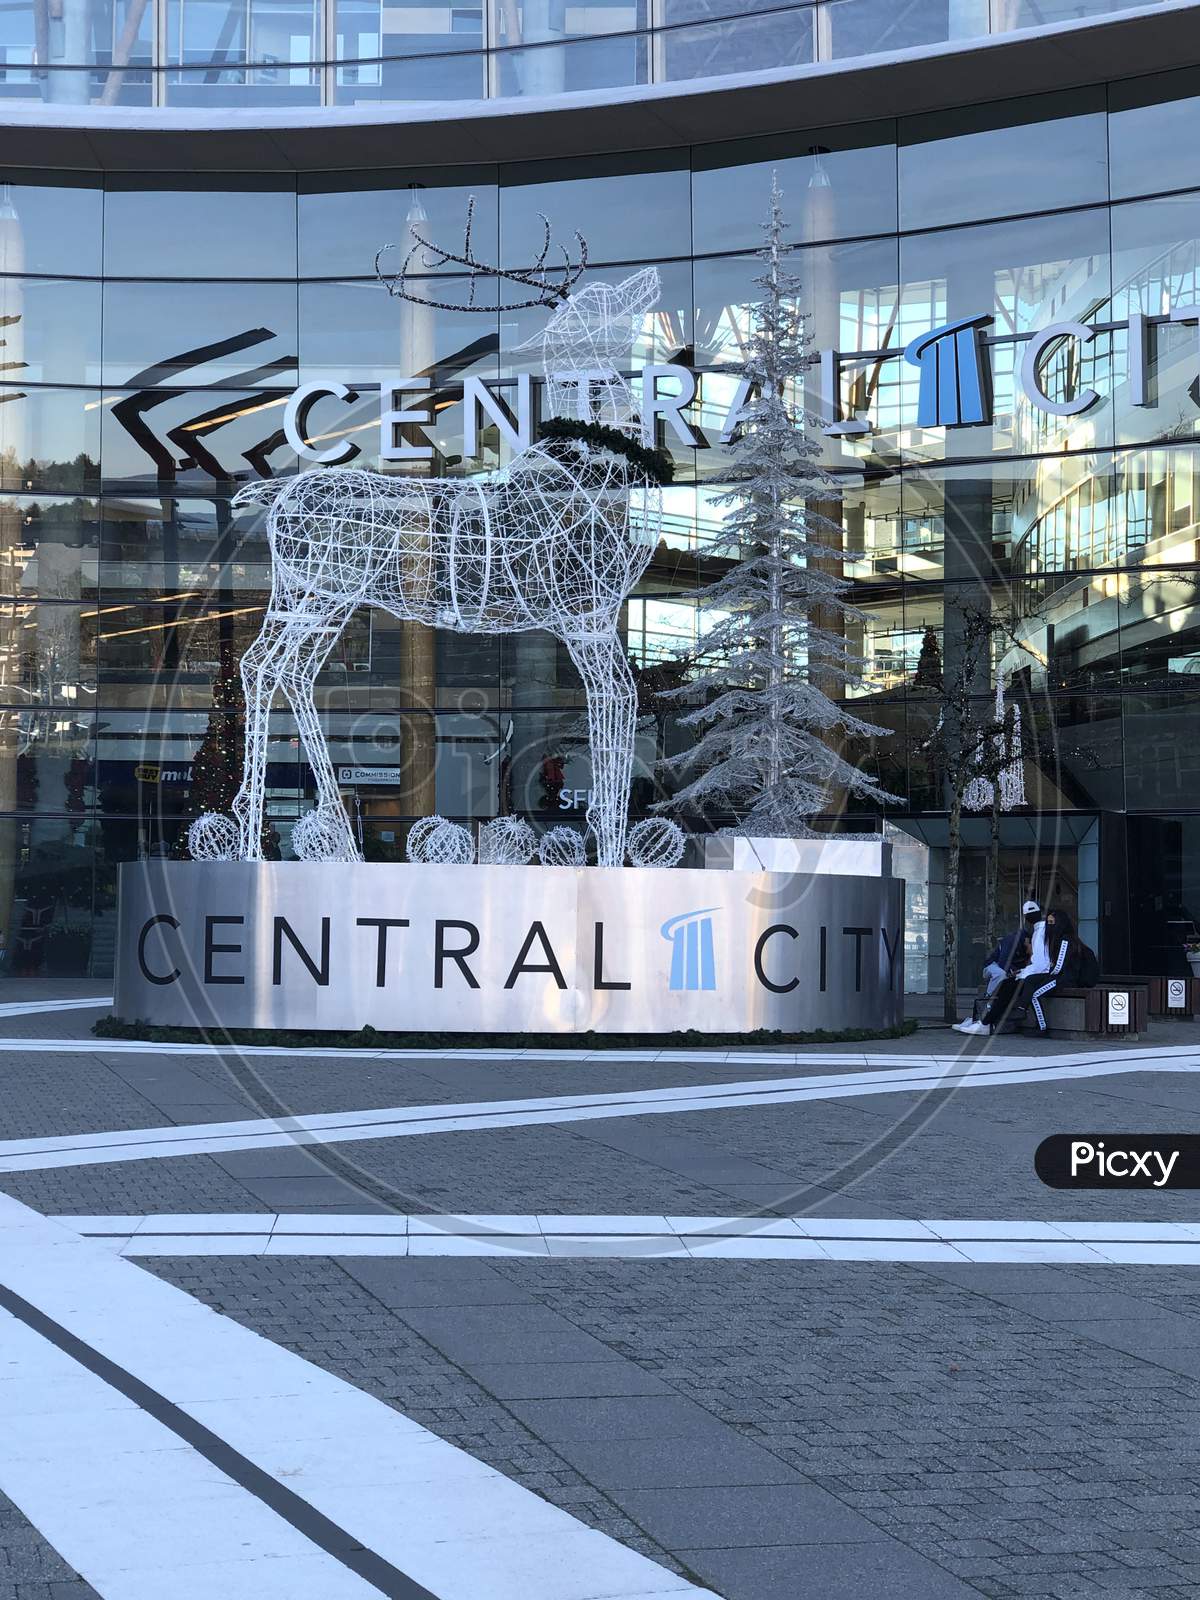 Image of Surrey central-OF445238-Picxy